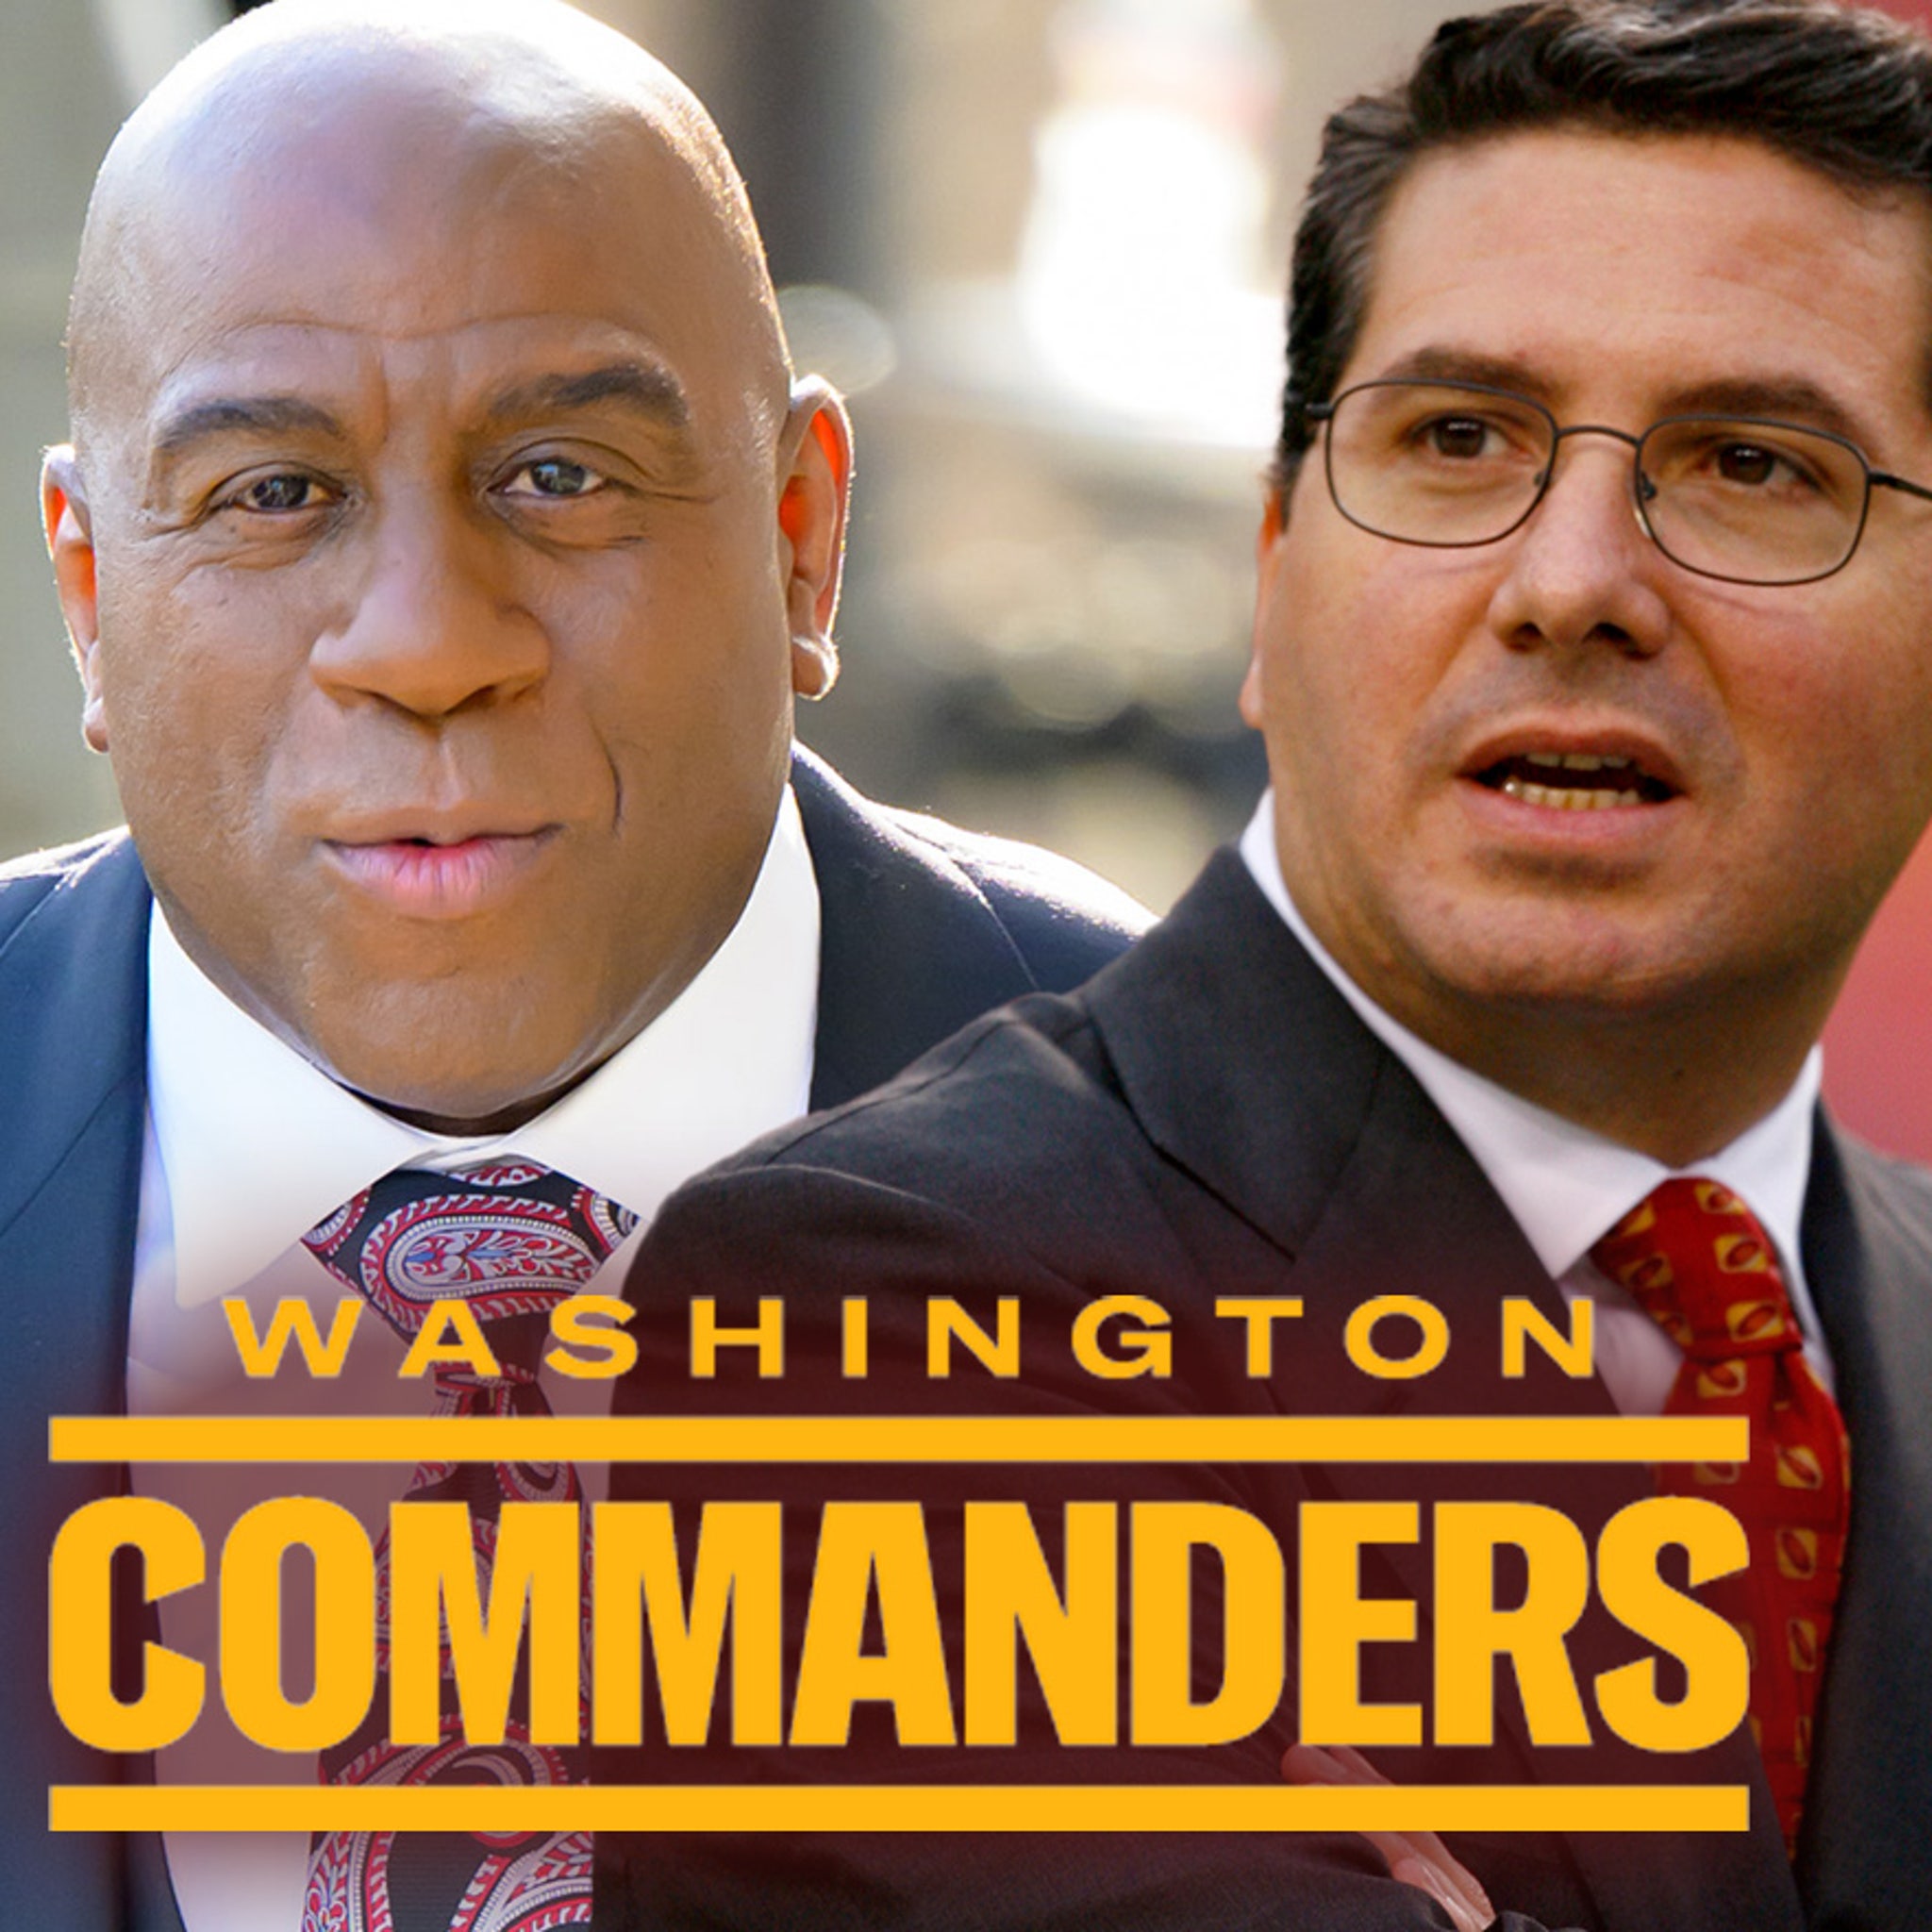 Magic Johnson Group Submits $6 Billion Bid To Buy Commanders From Dan Snyder